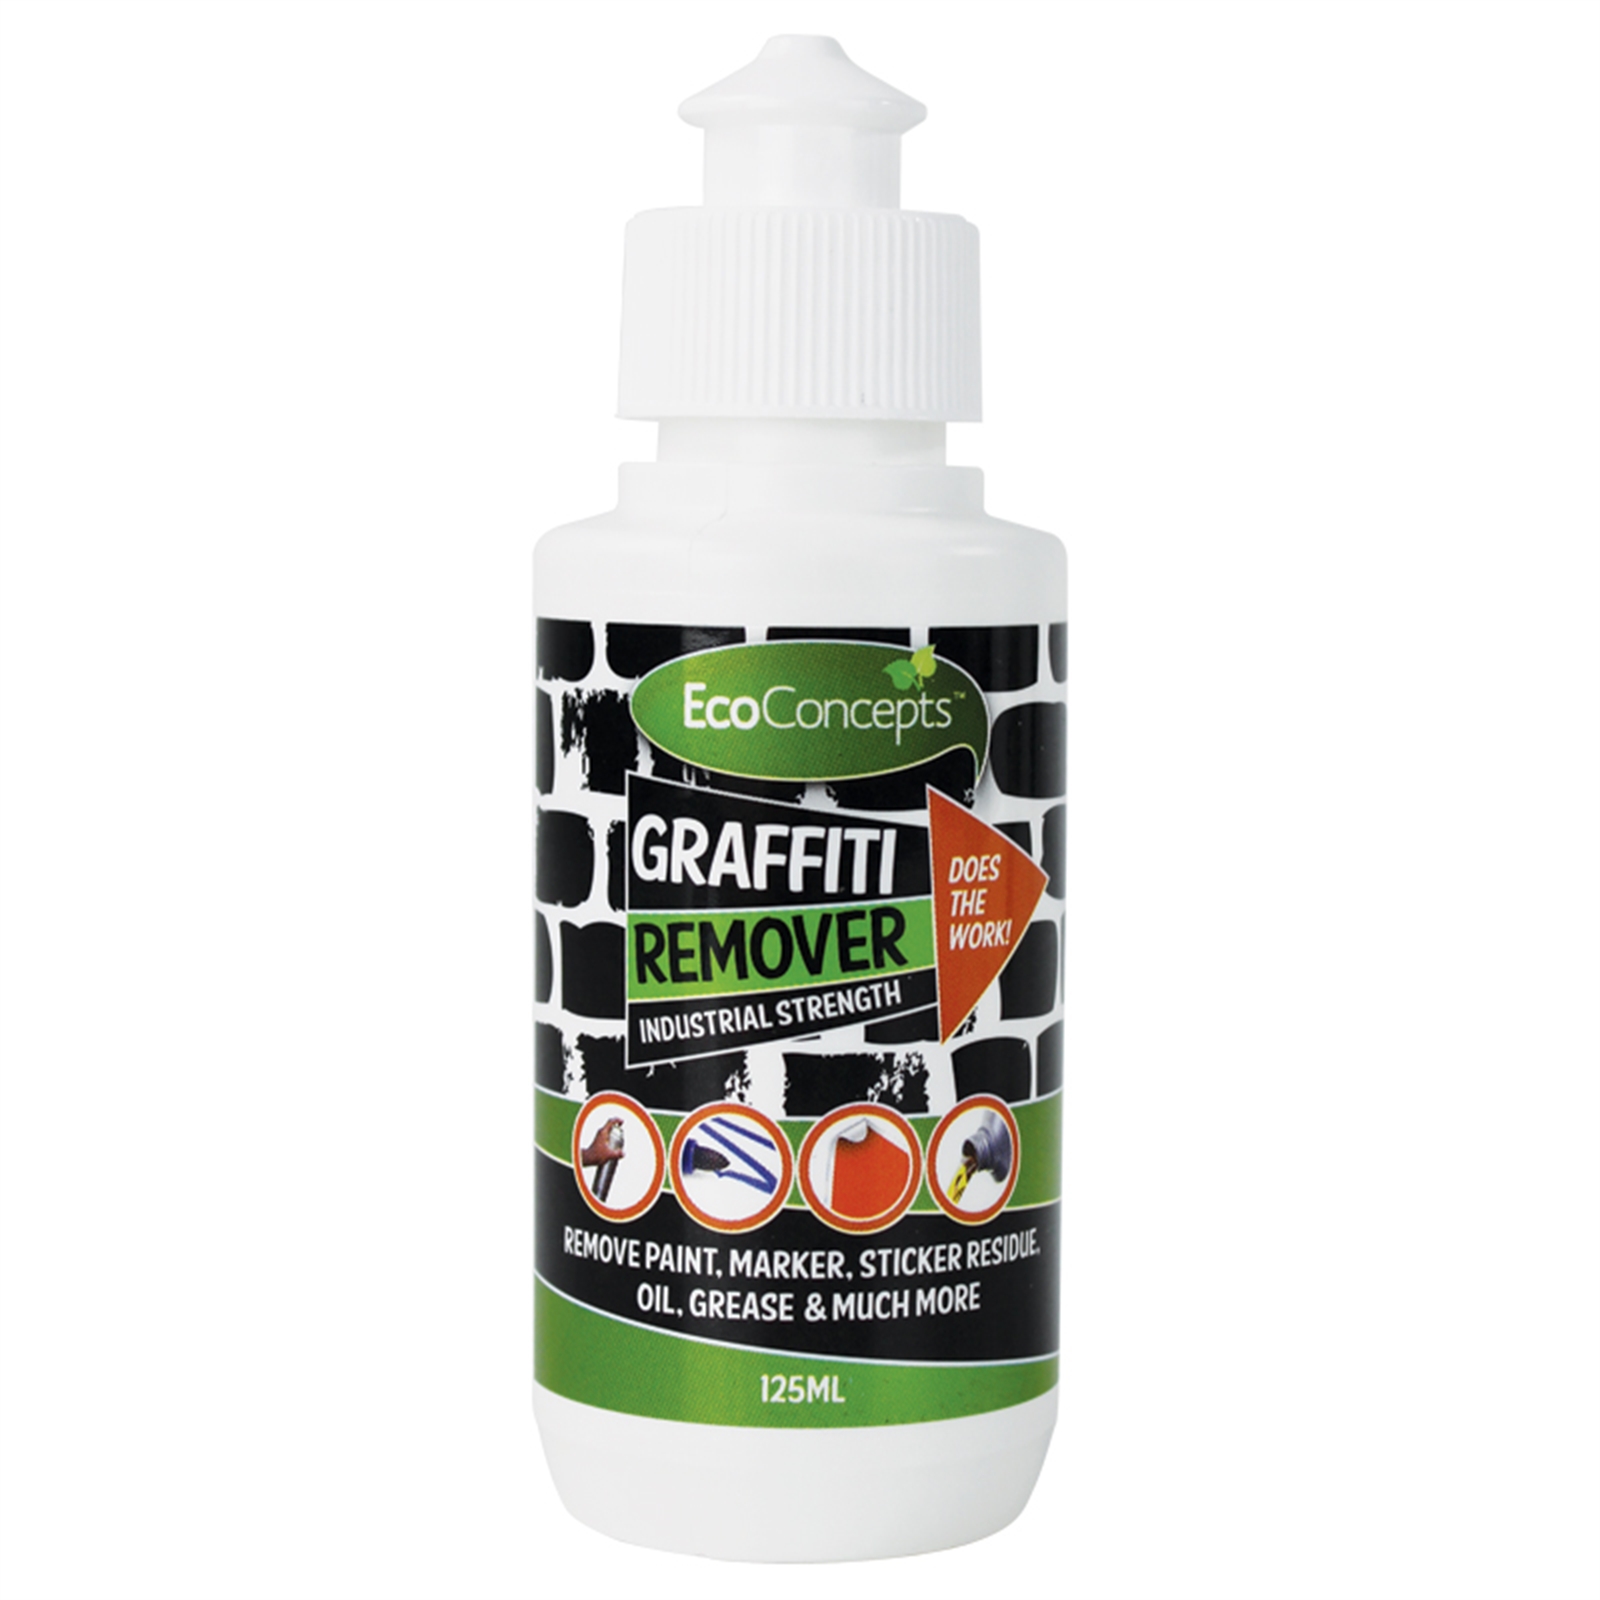 EcoConcepts 125ml Industrial Strength Graffiti Remover